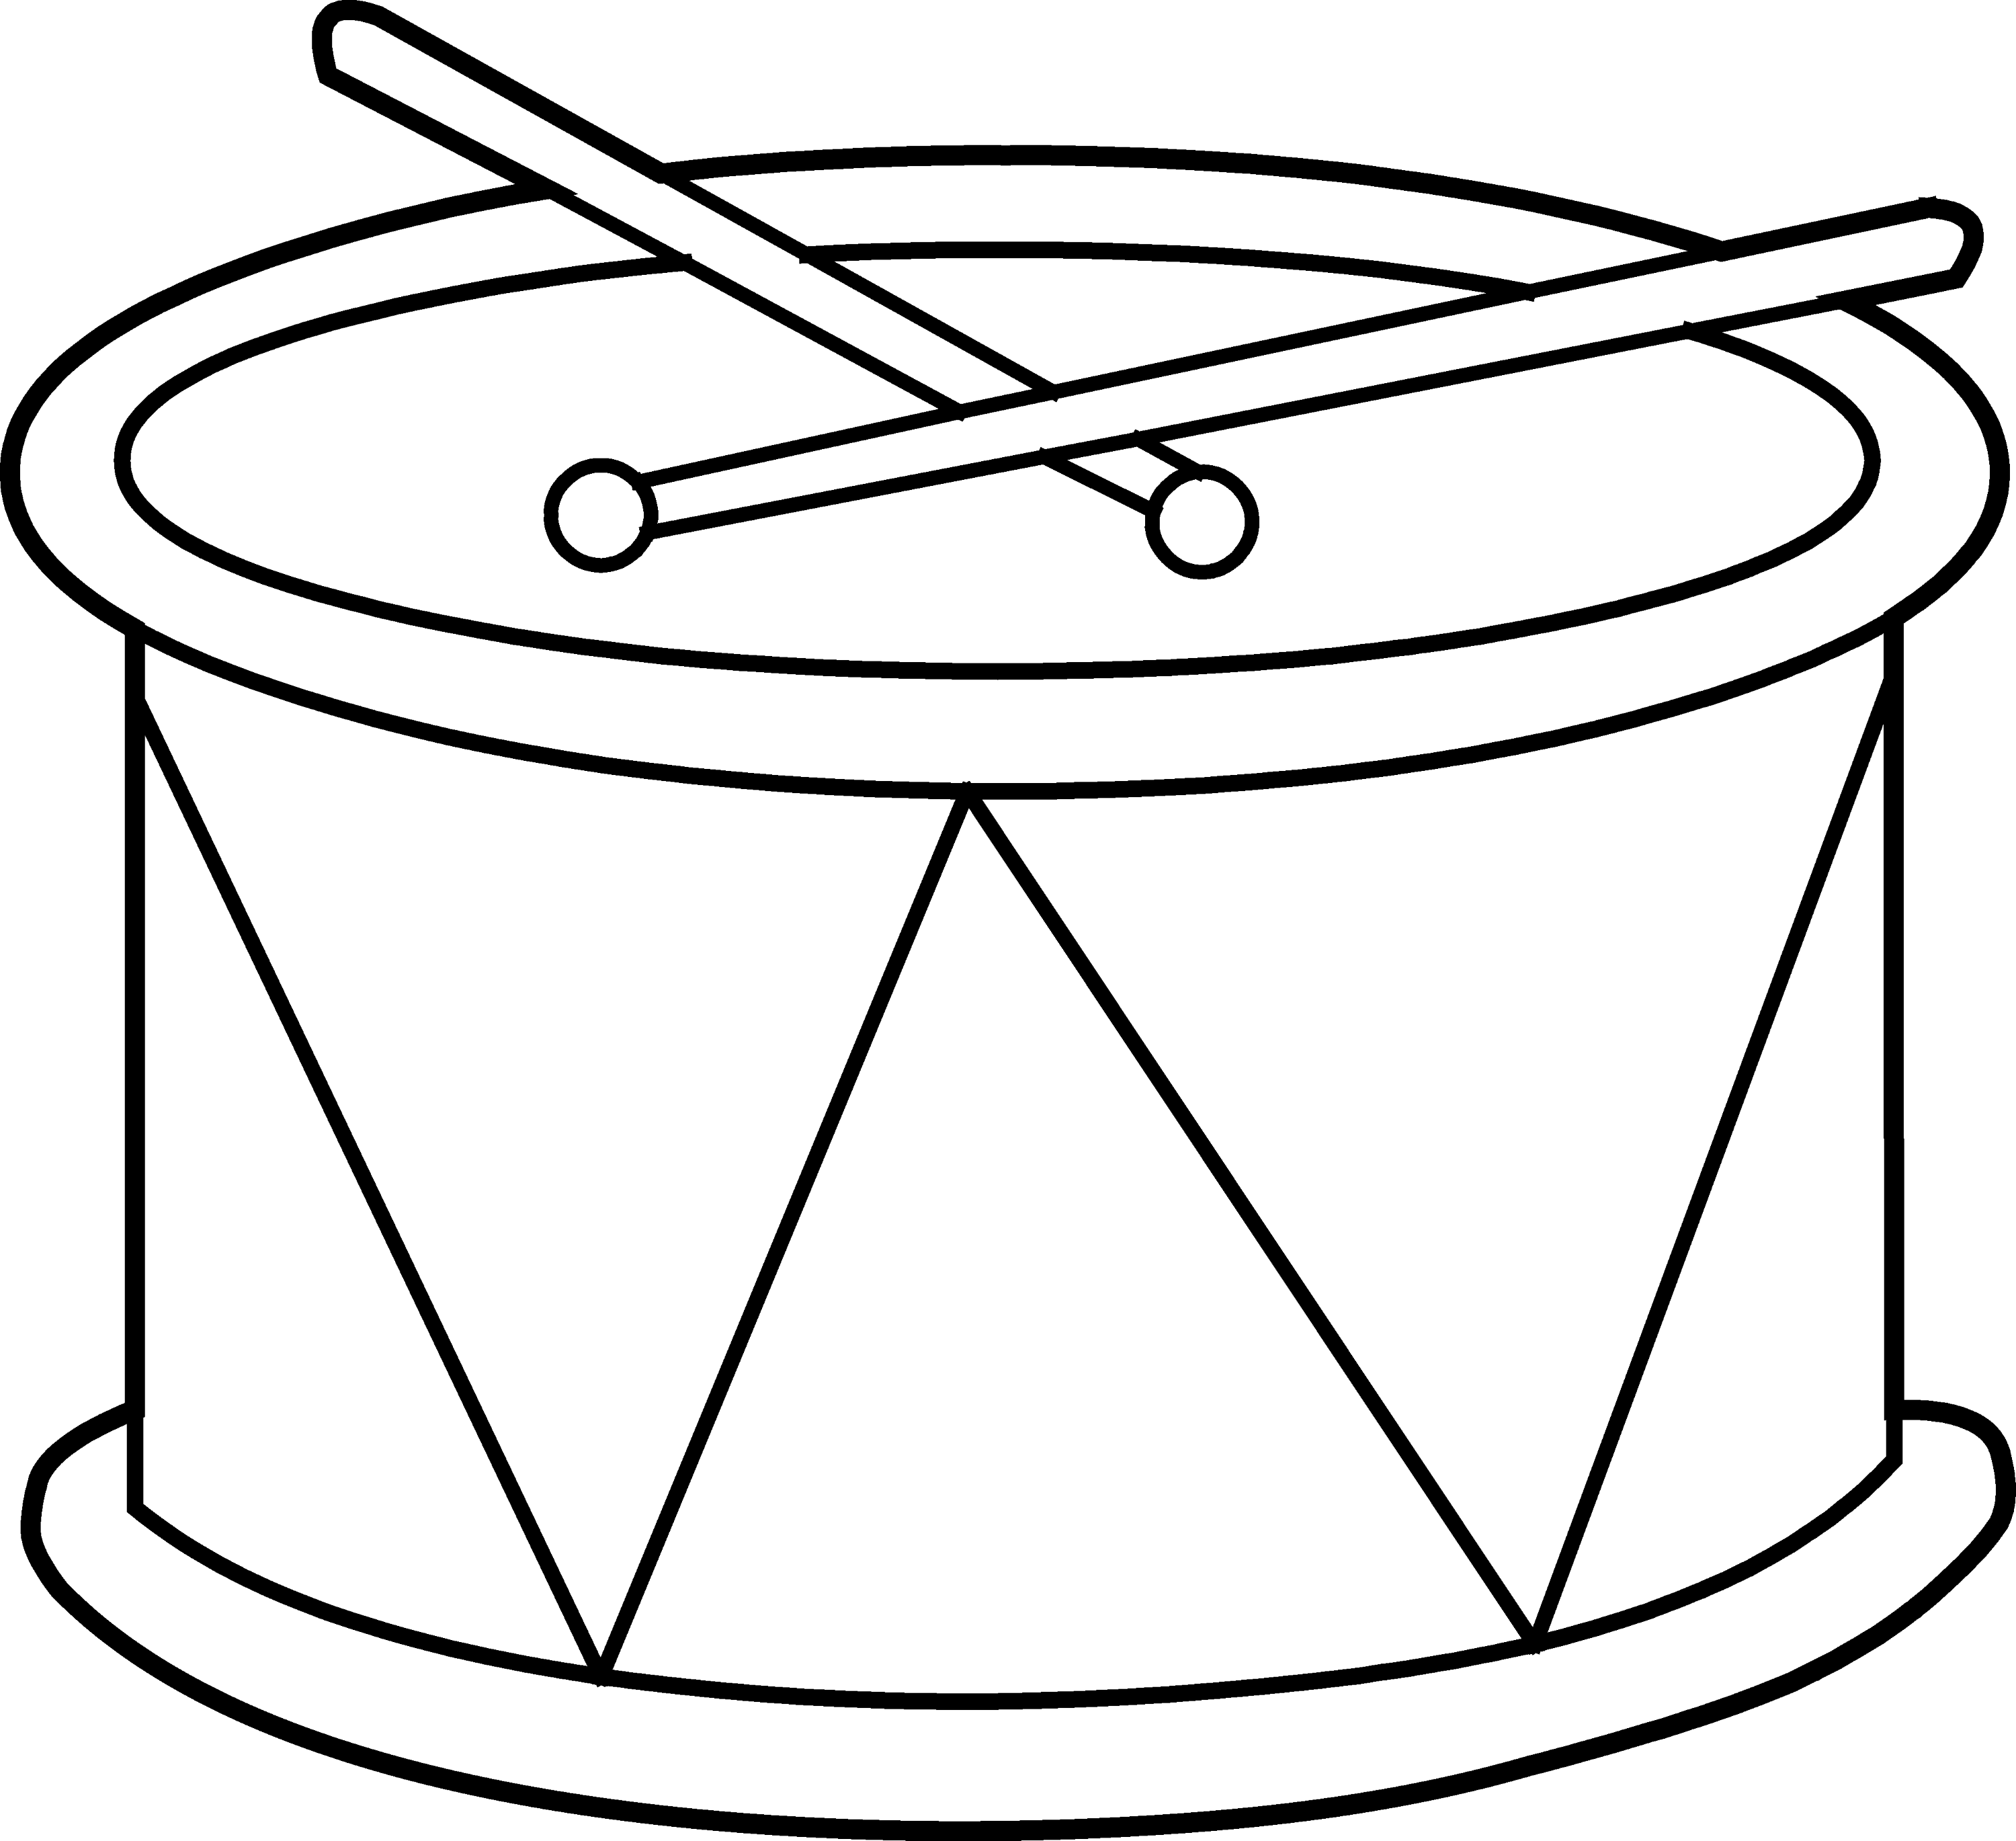 Marching Drum Coloring Page Free Clip Art